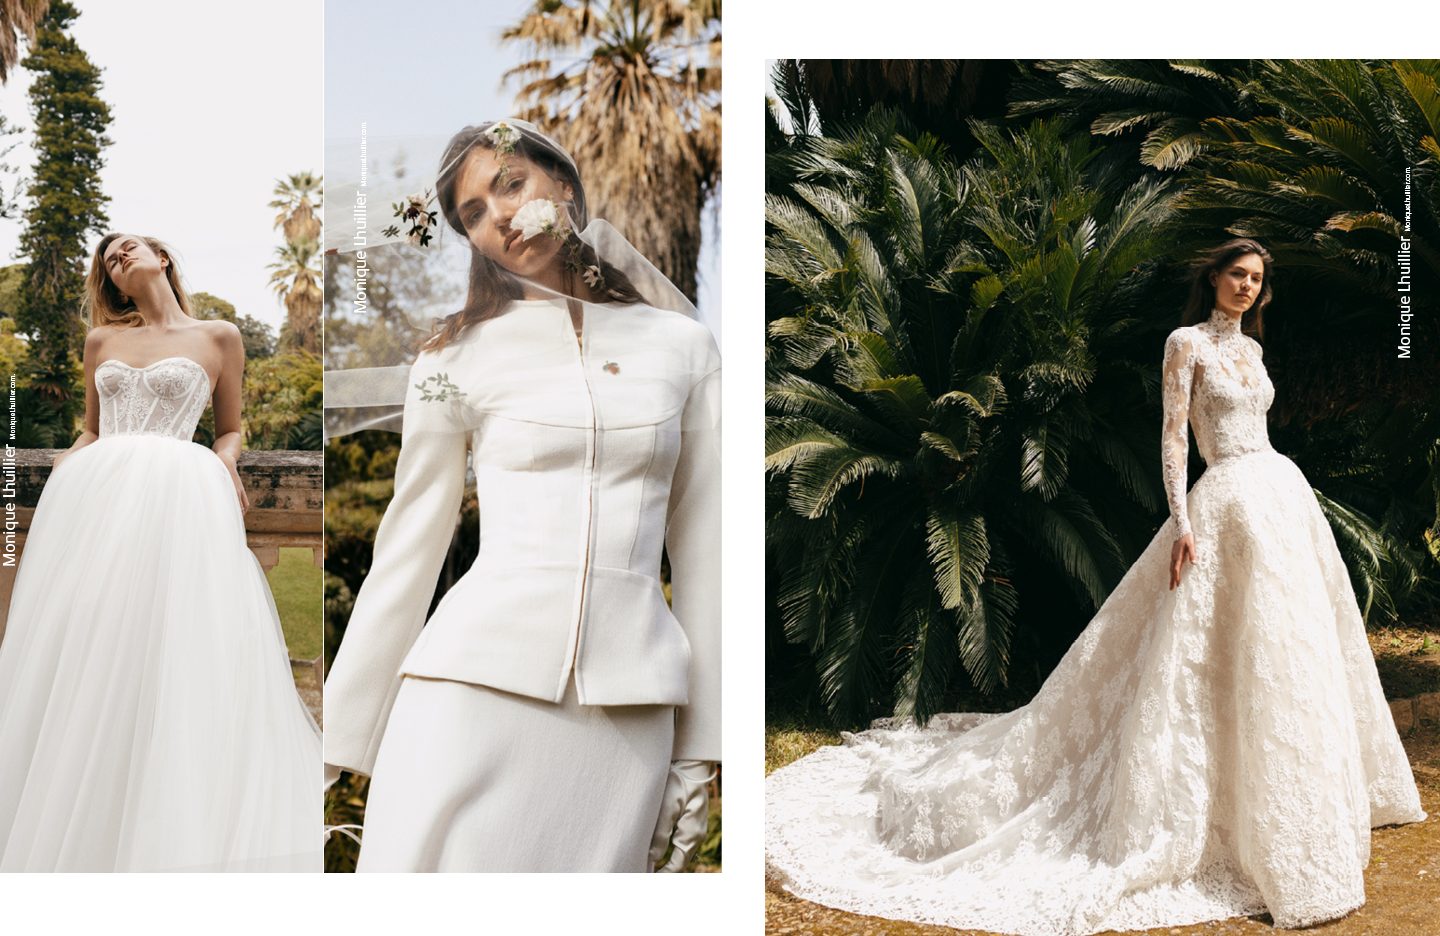 Latest bridal trends include color, short hemlines, eco-friendly and lace